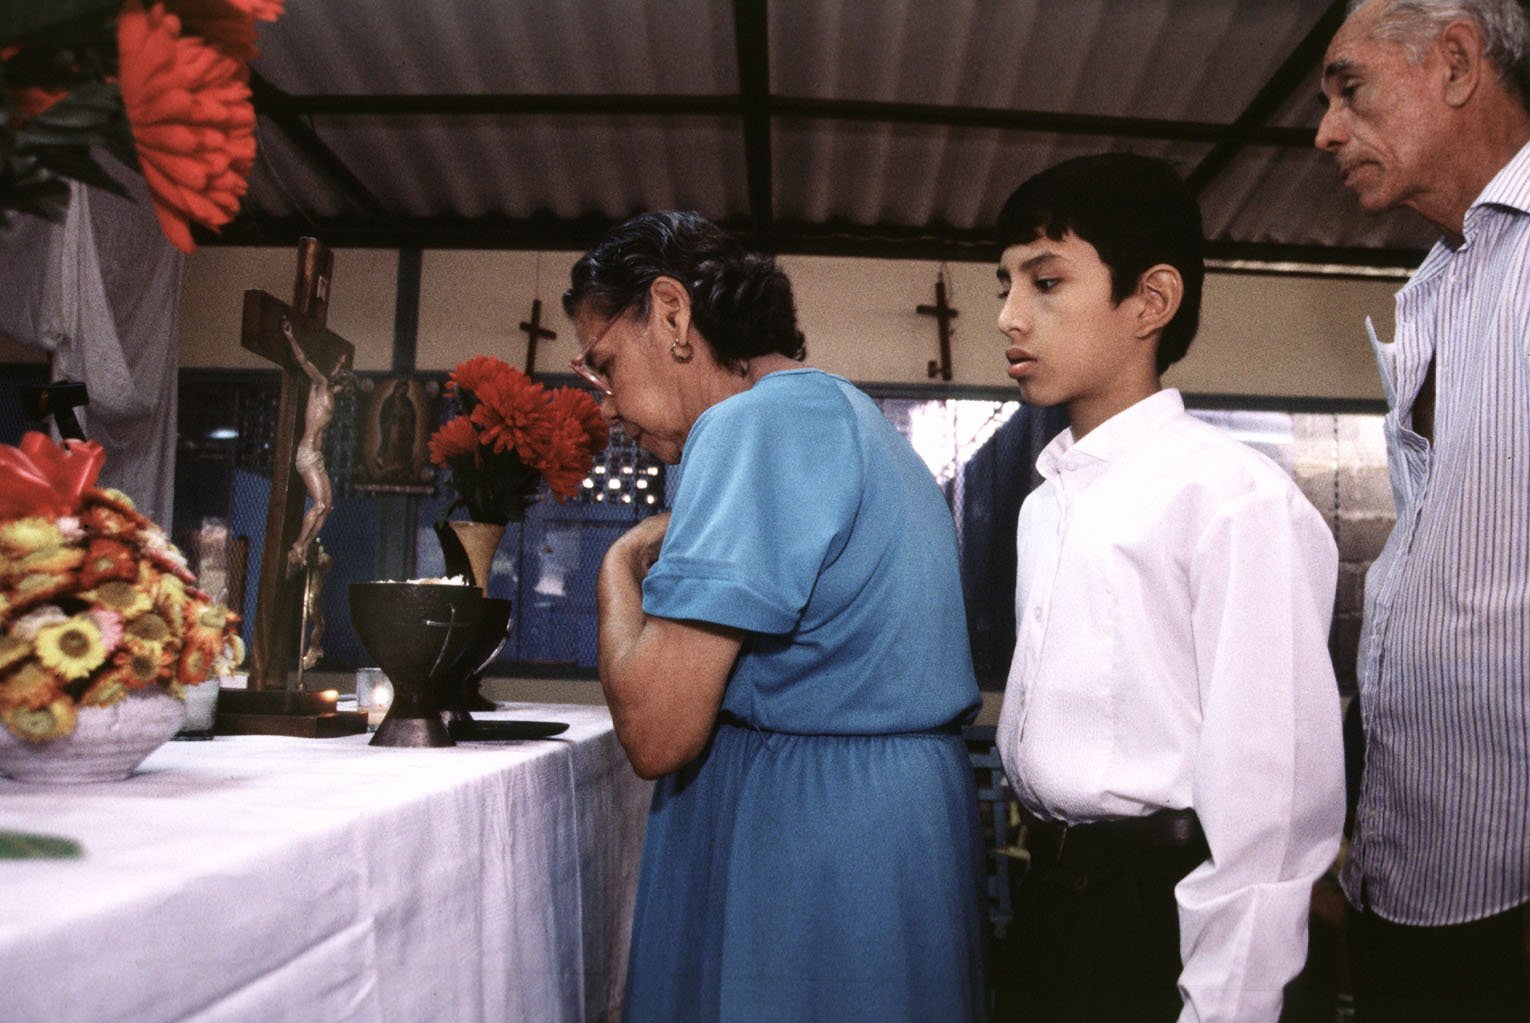 Residents of the Nicarao neighborhood in Managua, Nicaragua, pictured in an undated photo, receive Communion during Mass at their local chapel. Basic Christian communities formed in the 1980s exist in many areas of Nicaragua. (OSV News photo/Rohanna Mertens)